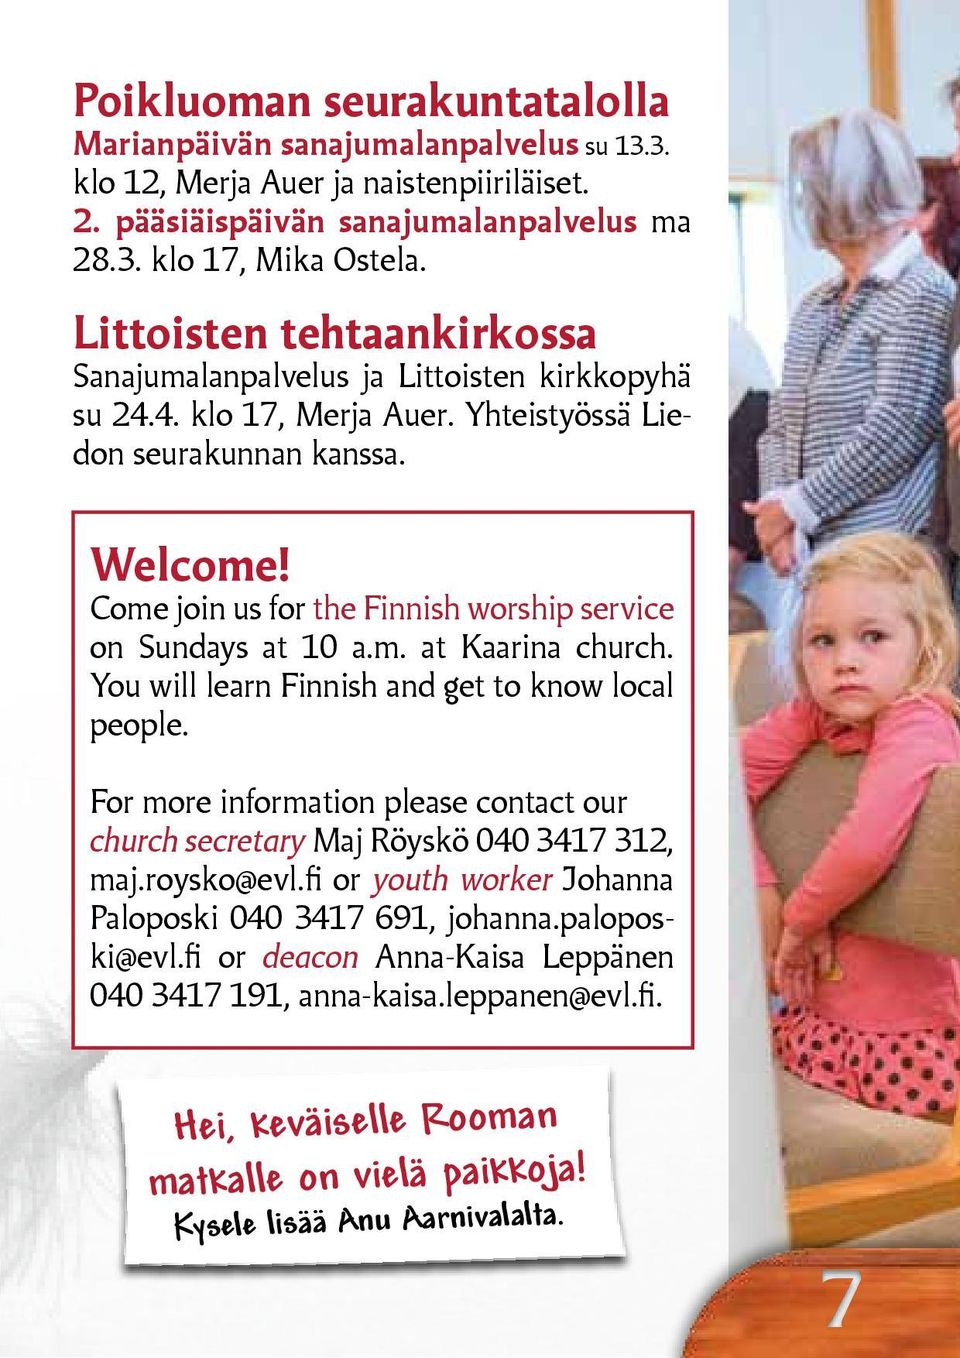 Come join us for the Finnish worship service on Sundays at 10 a.m. at Kaarina church. You will learn Finnish and get to know local people.